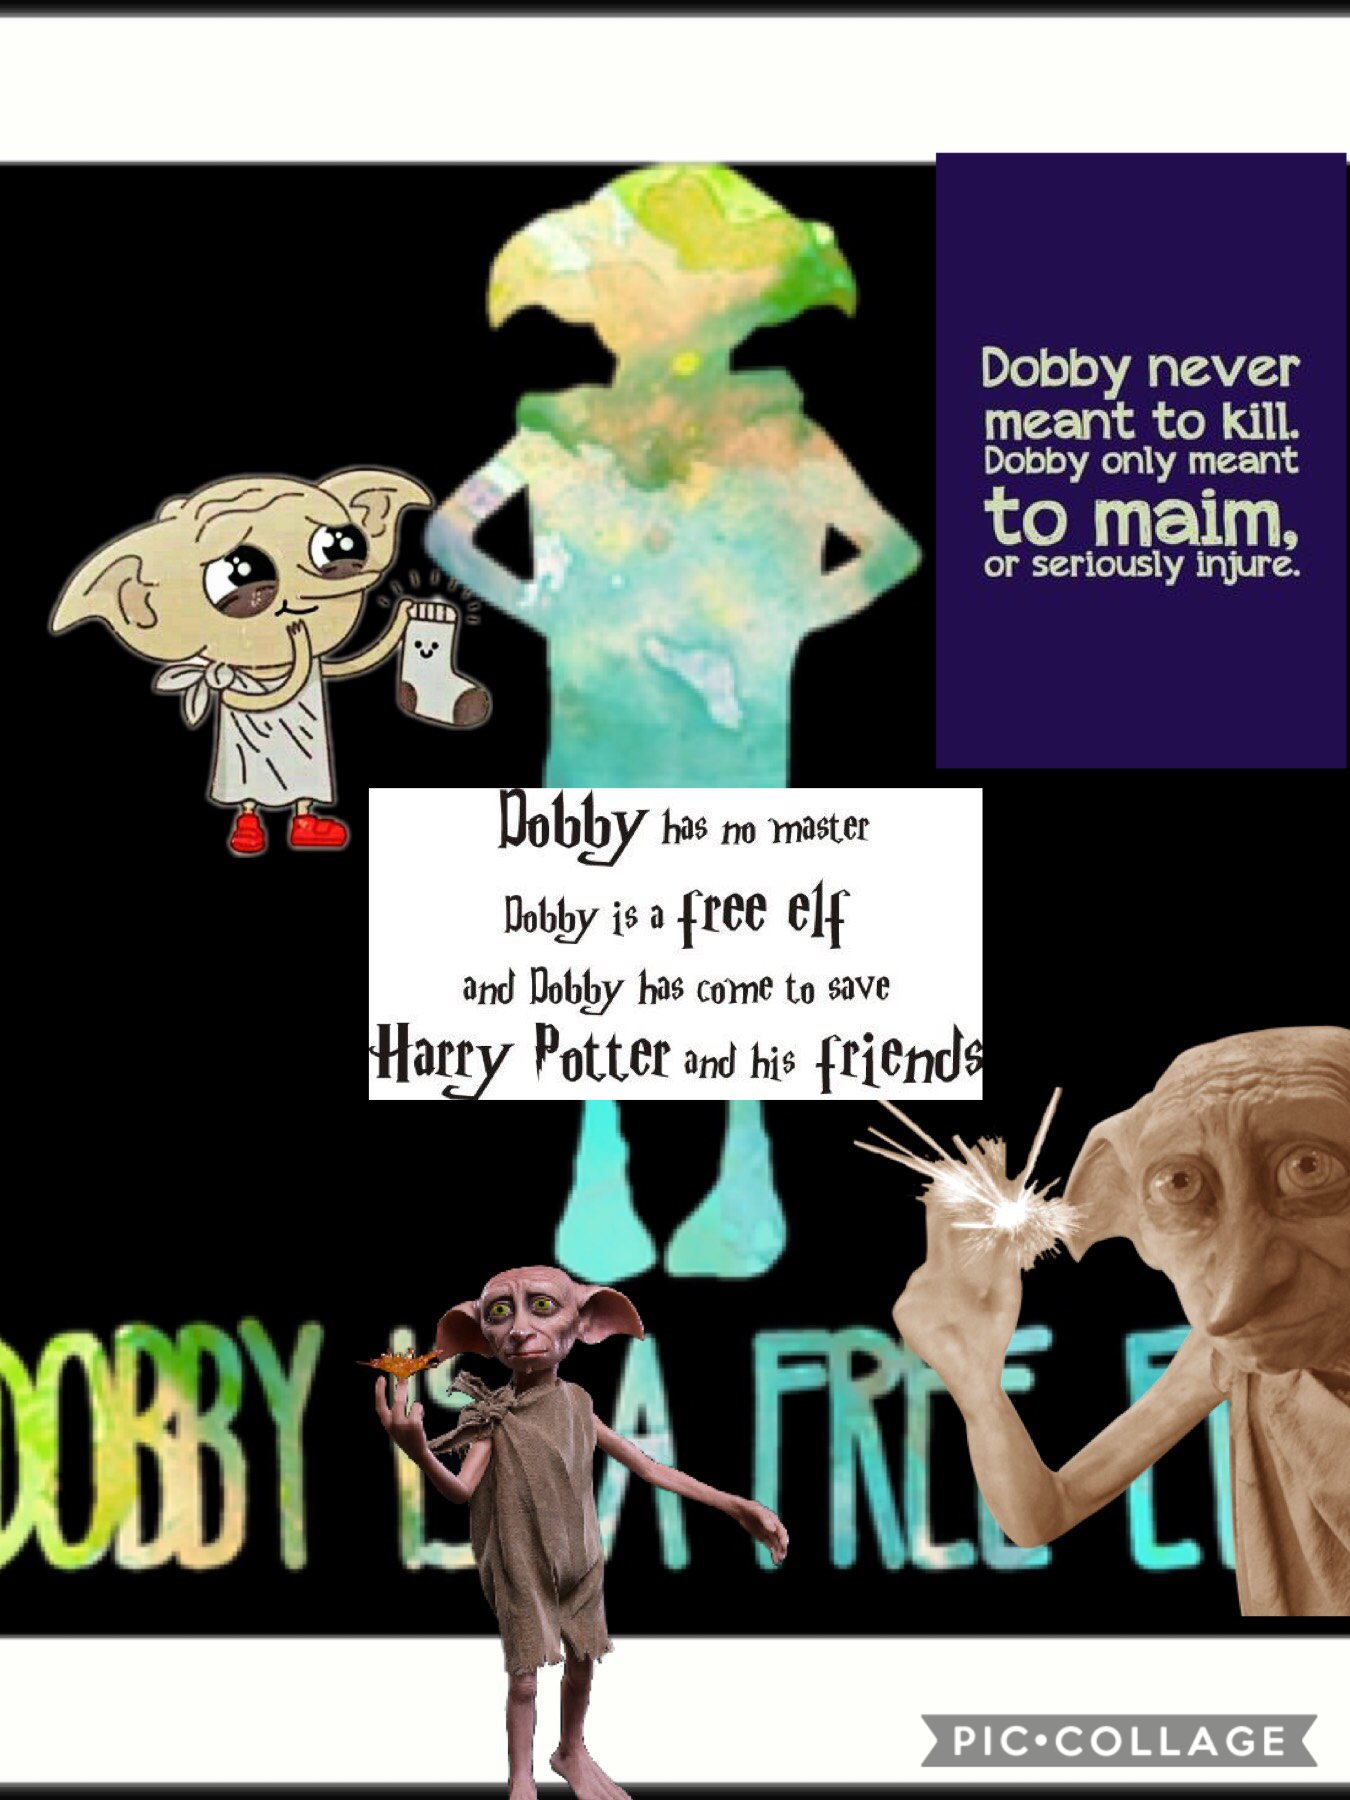 DOBBY IS A FREE ELF HARRY POTTER